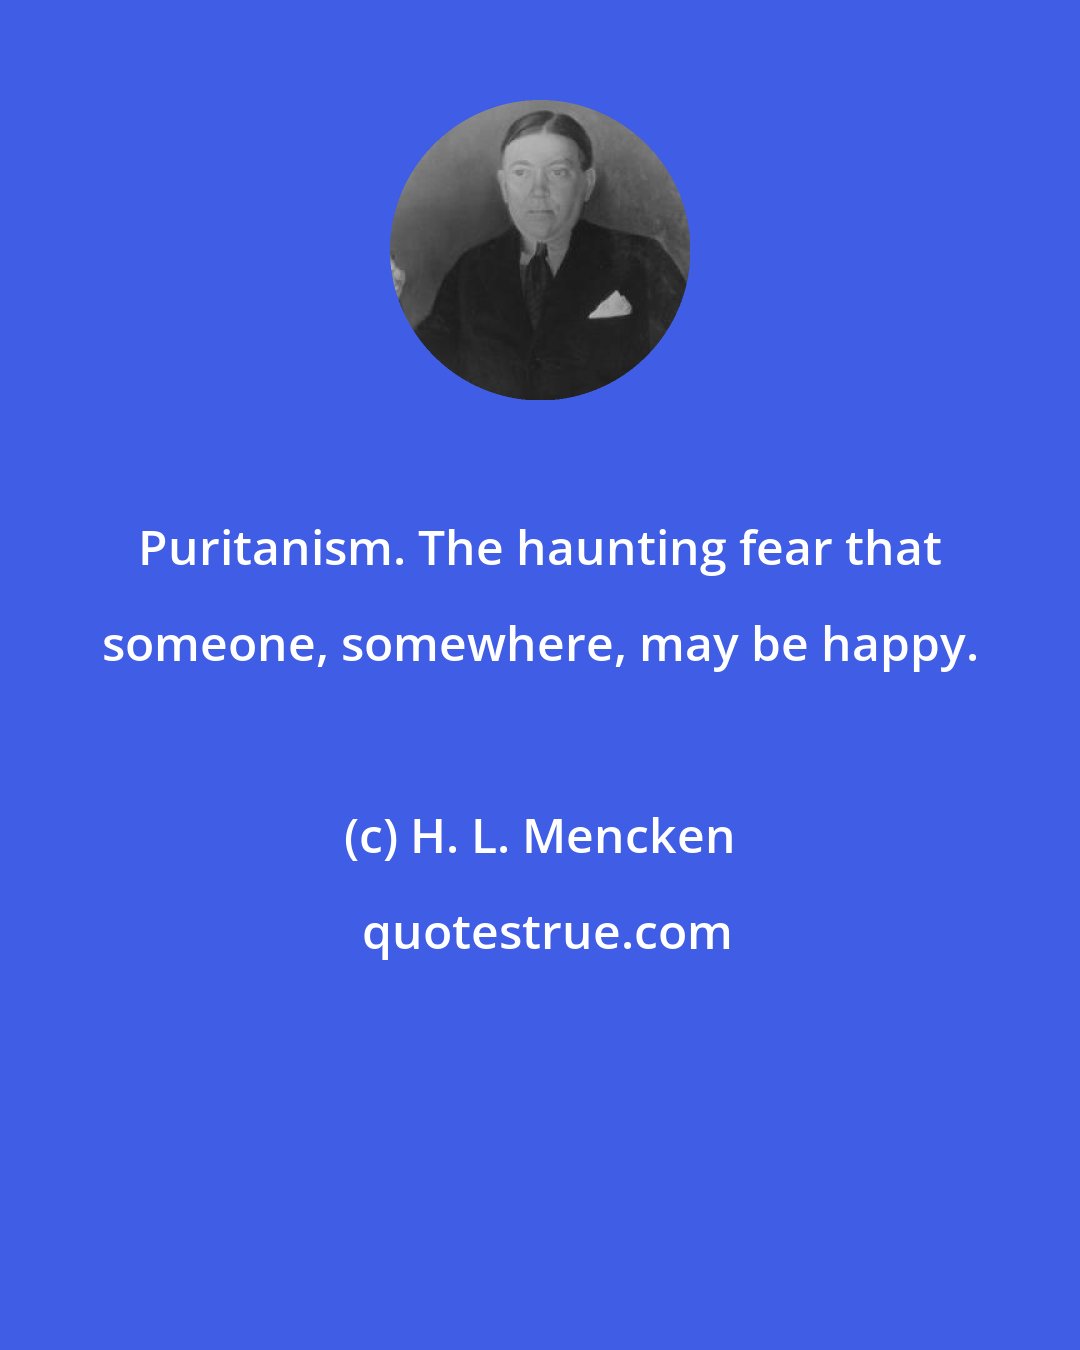 H. L. Mencken: Puritanism. The haunting fear that someone, somewhere, may be happy.